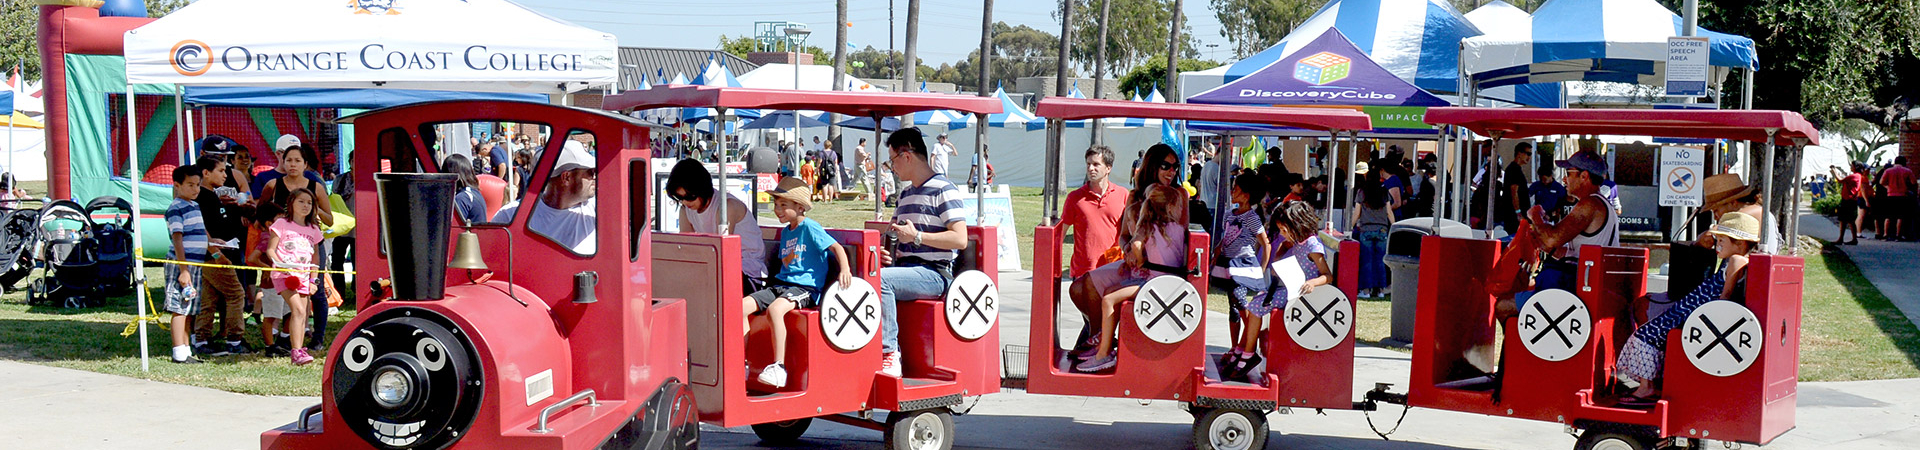 OC Book Festival at OCC: Parents and kids riding on trackless train